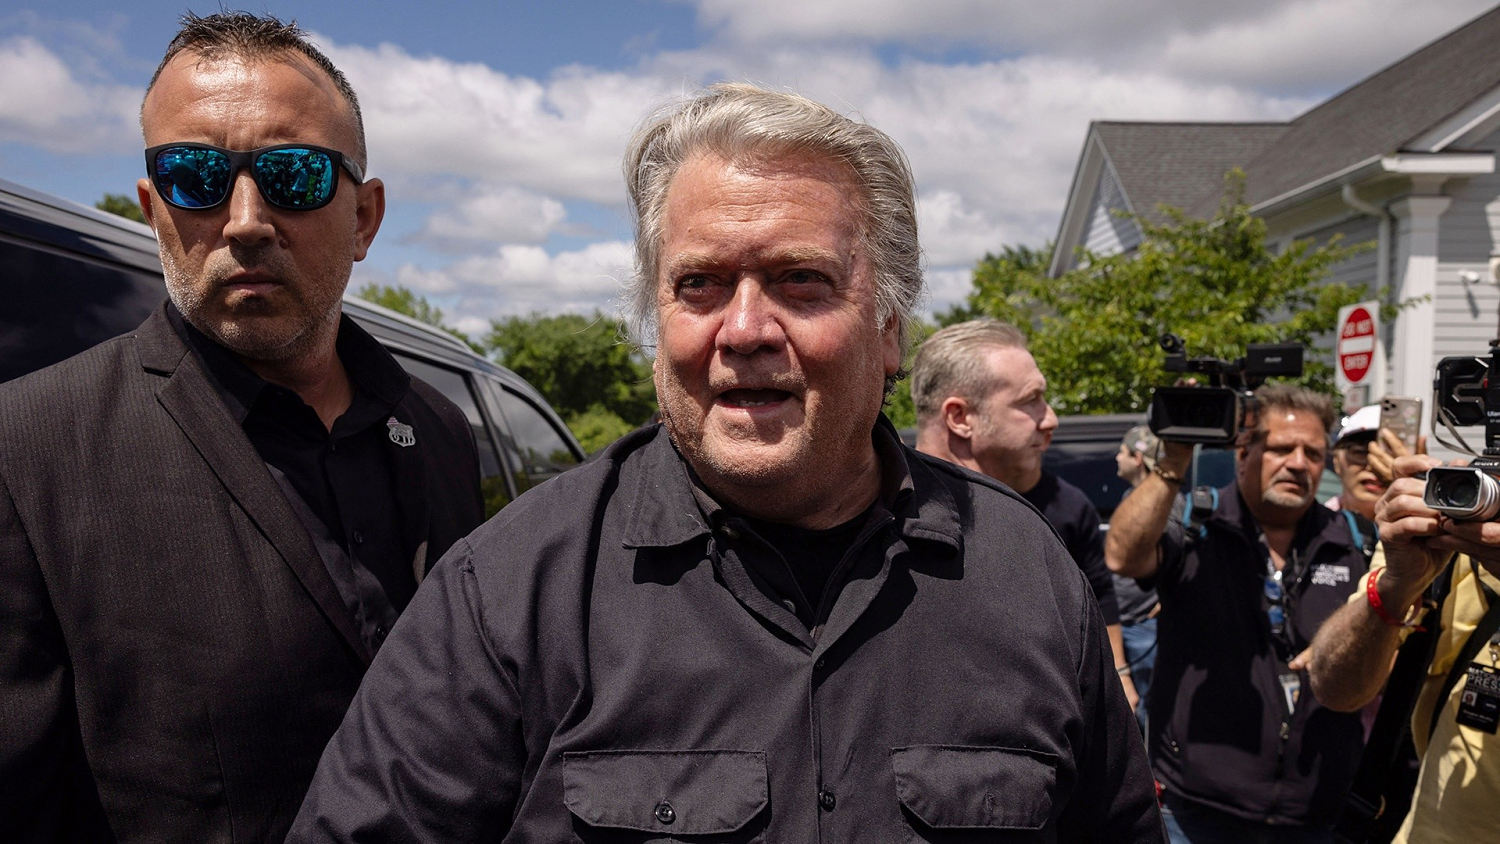 Steve Bannon reports to prison to serve 4 months for contempt